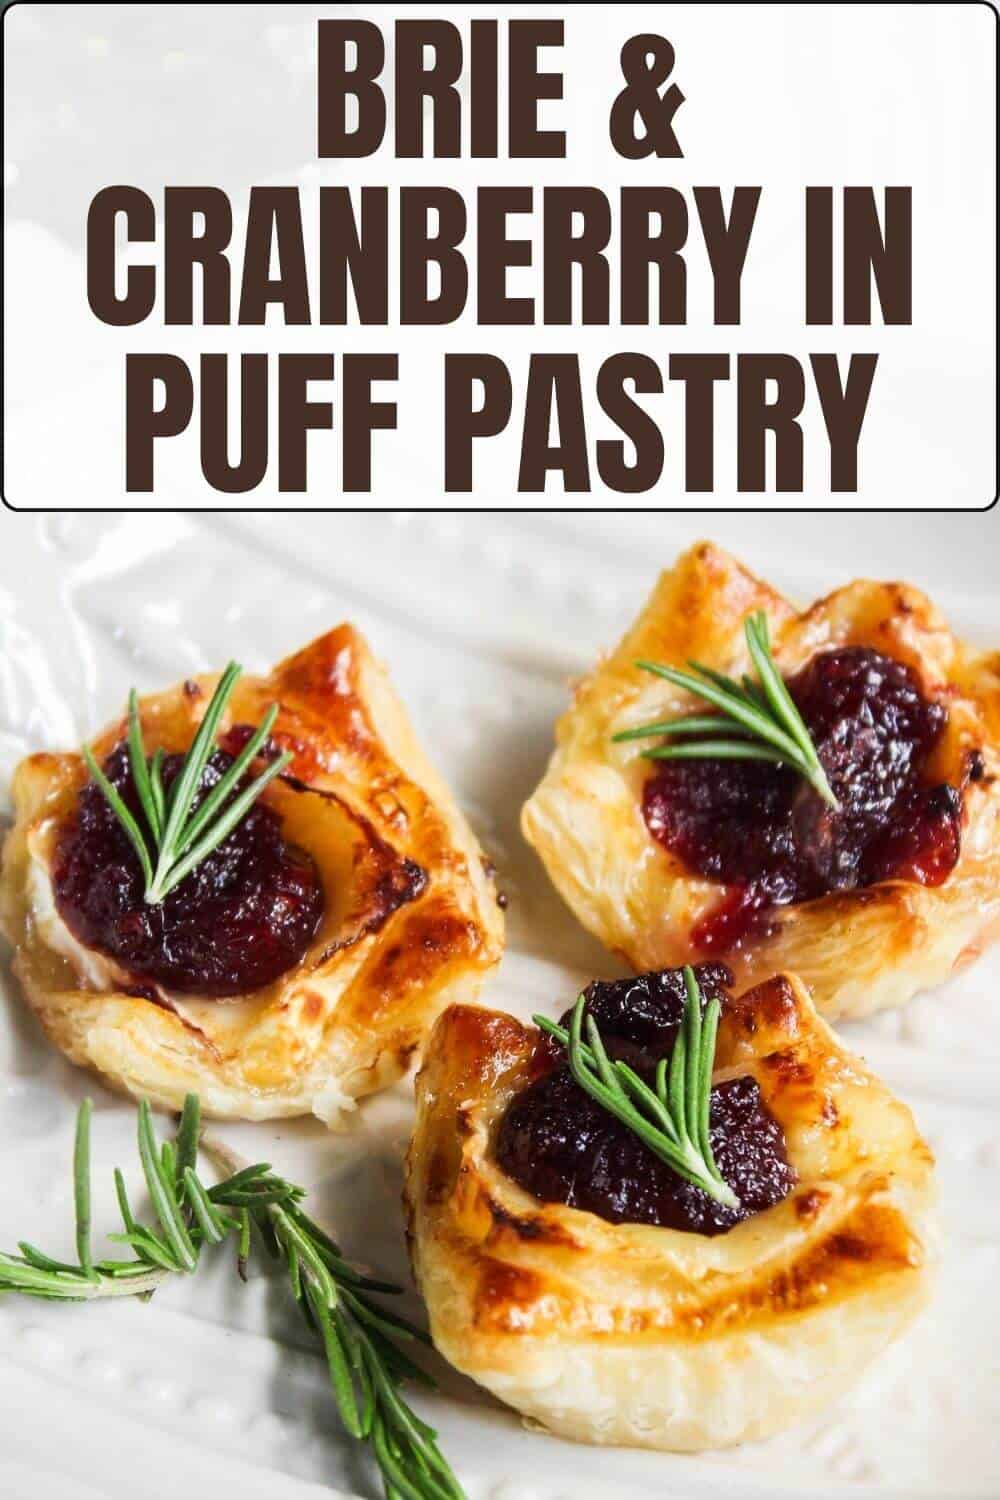 Brie and cranberry puff pastry.